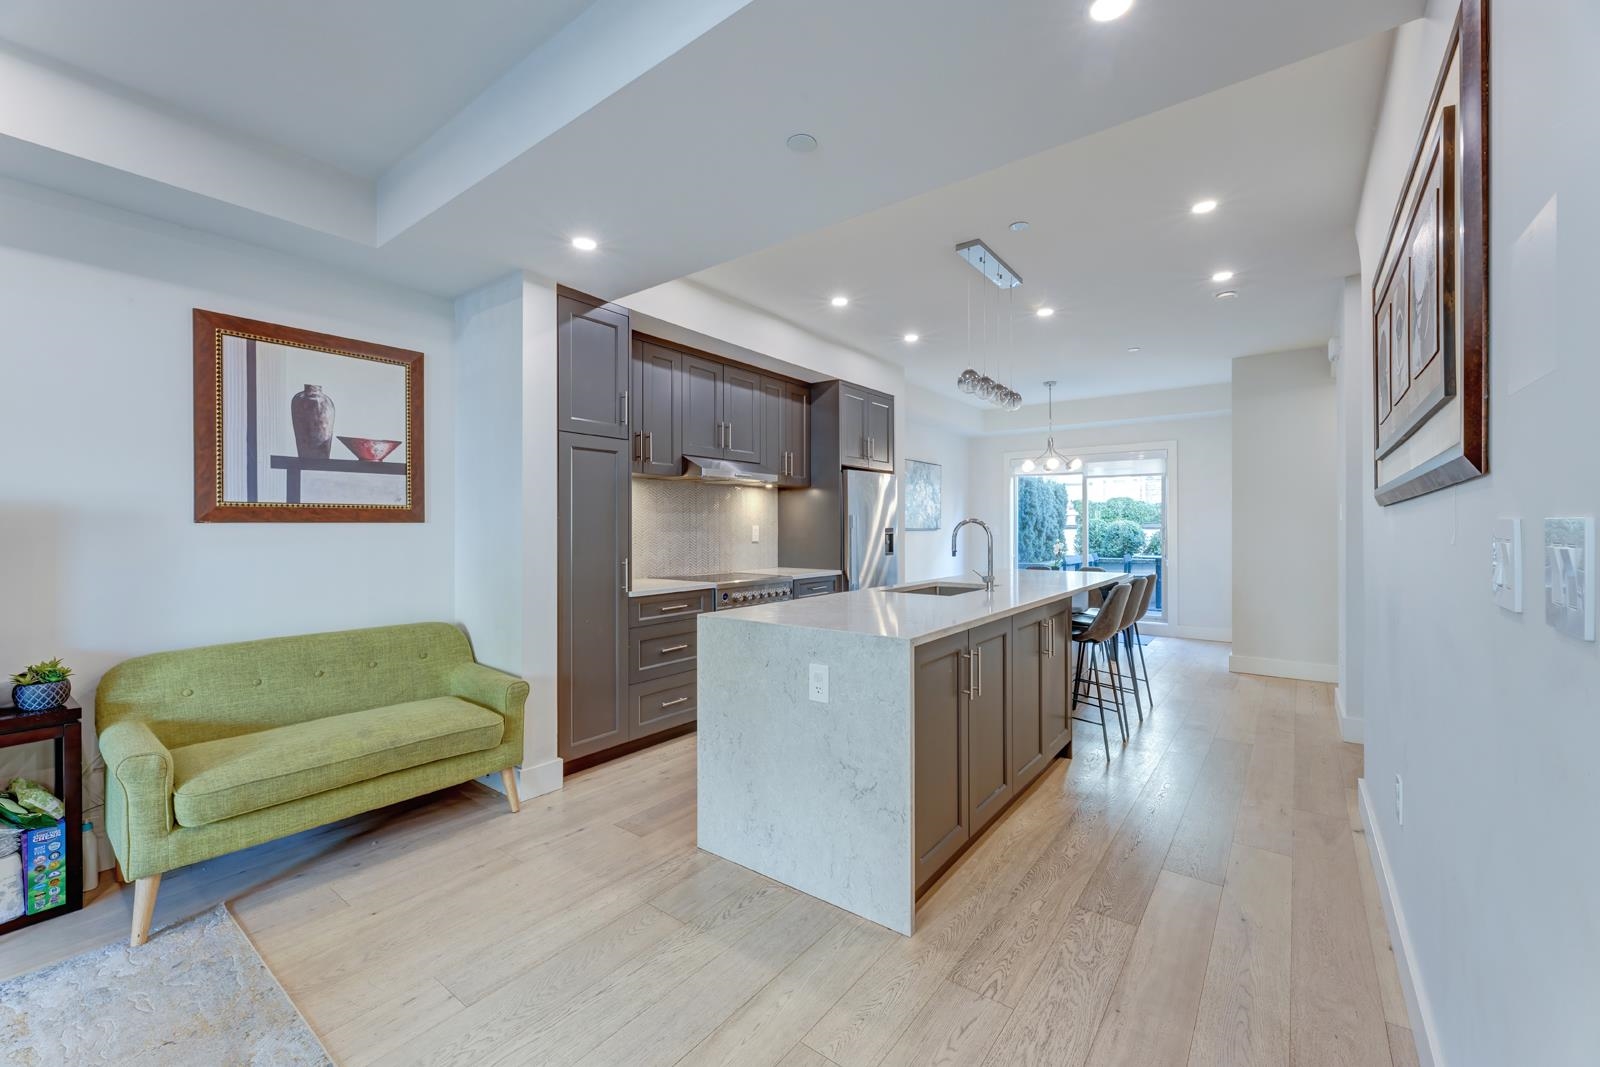 Listing image of 4 115 W QUEENS ROAD